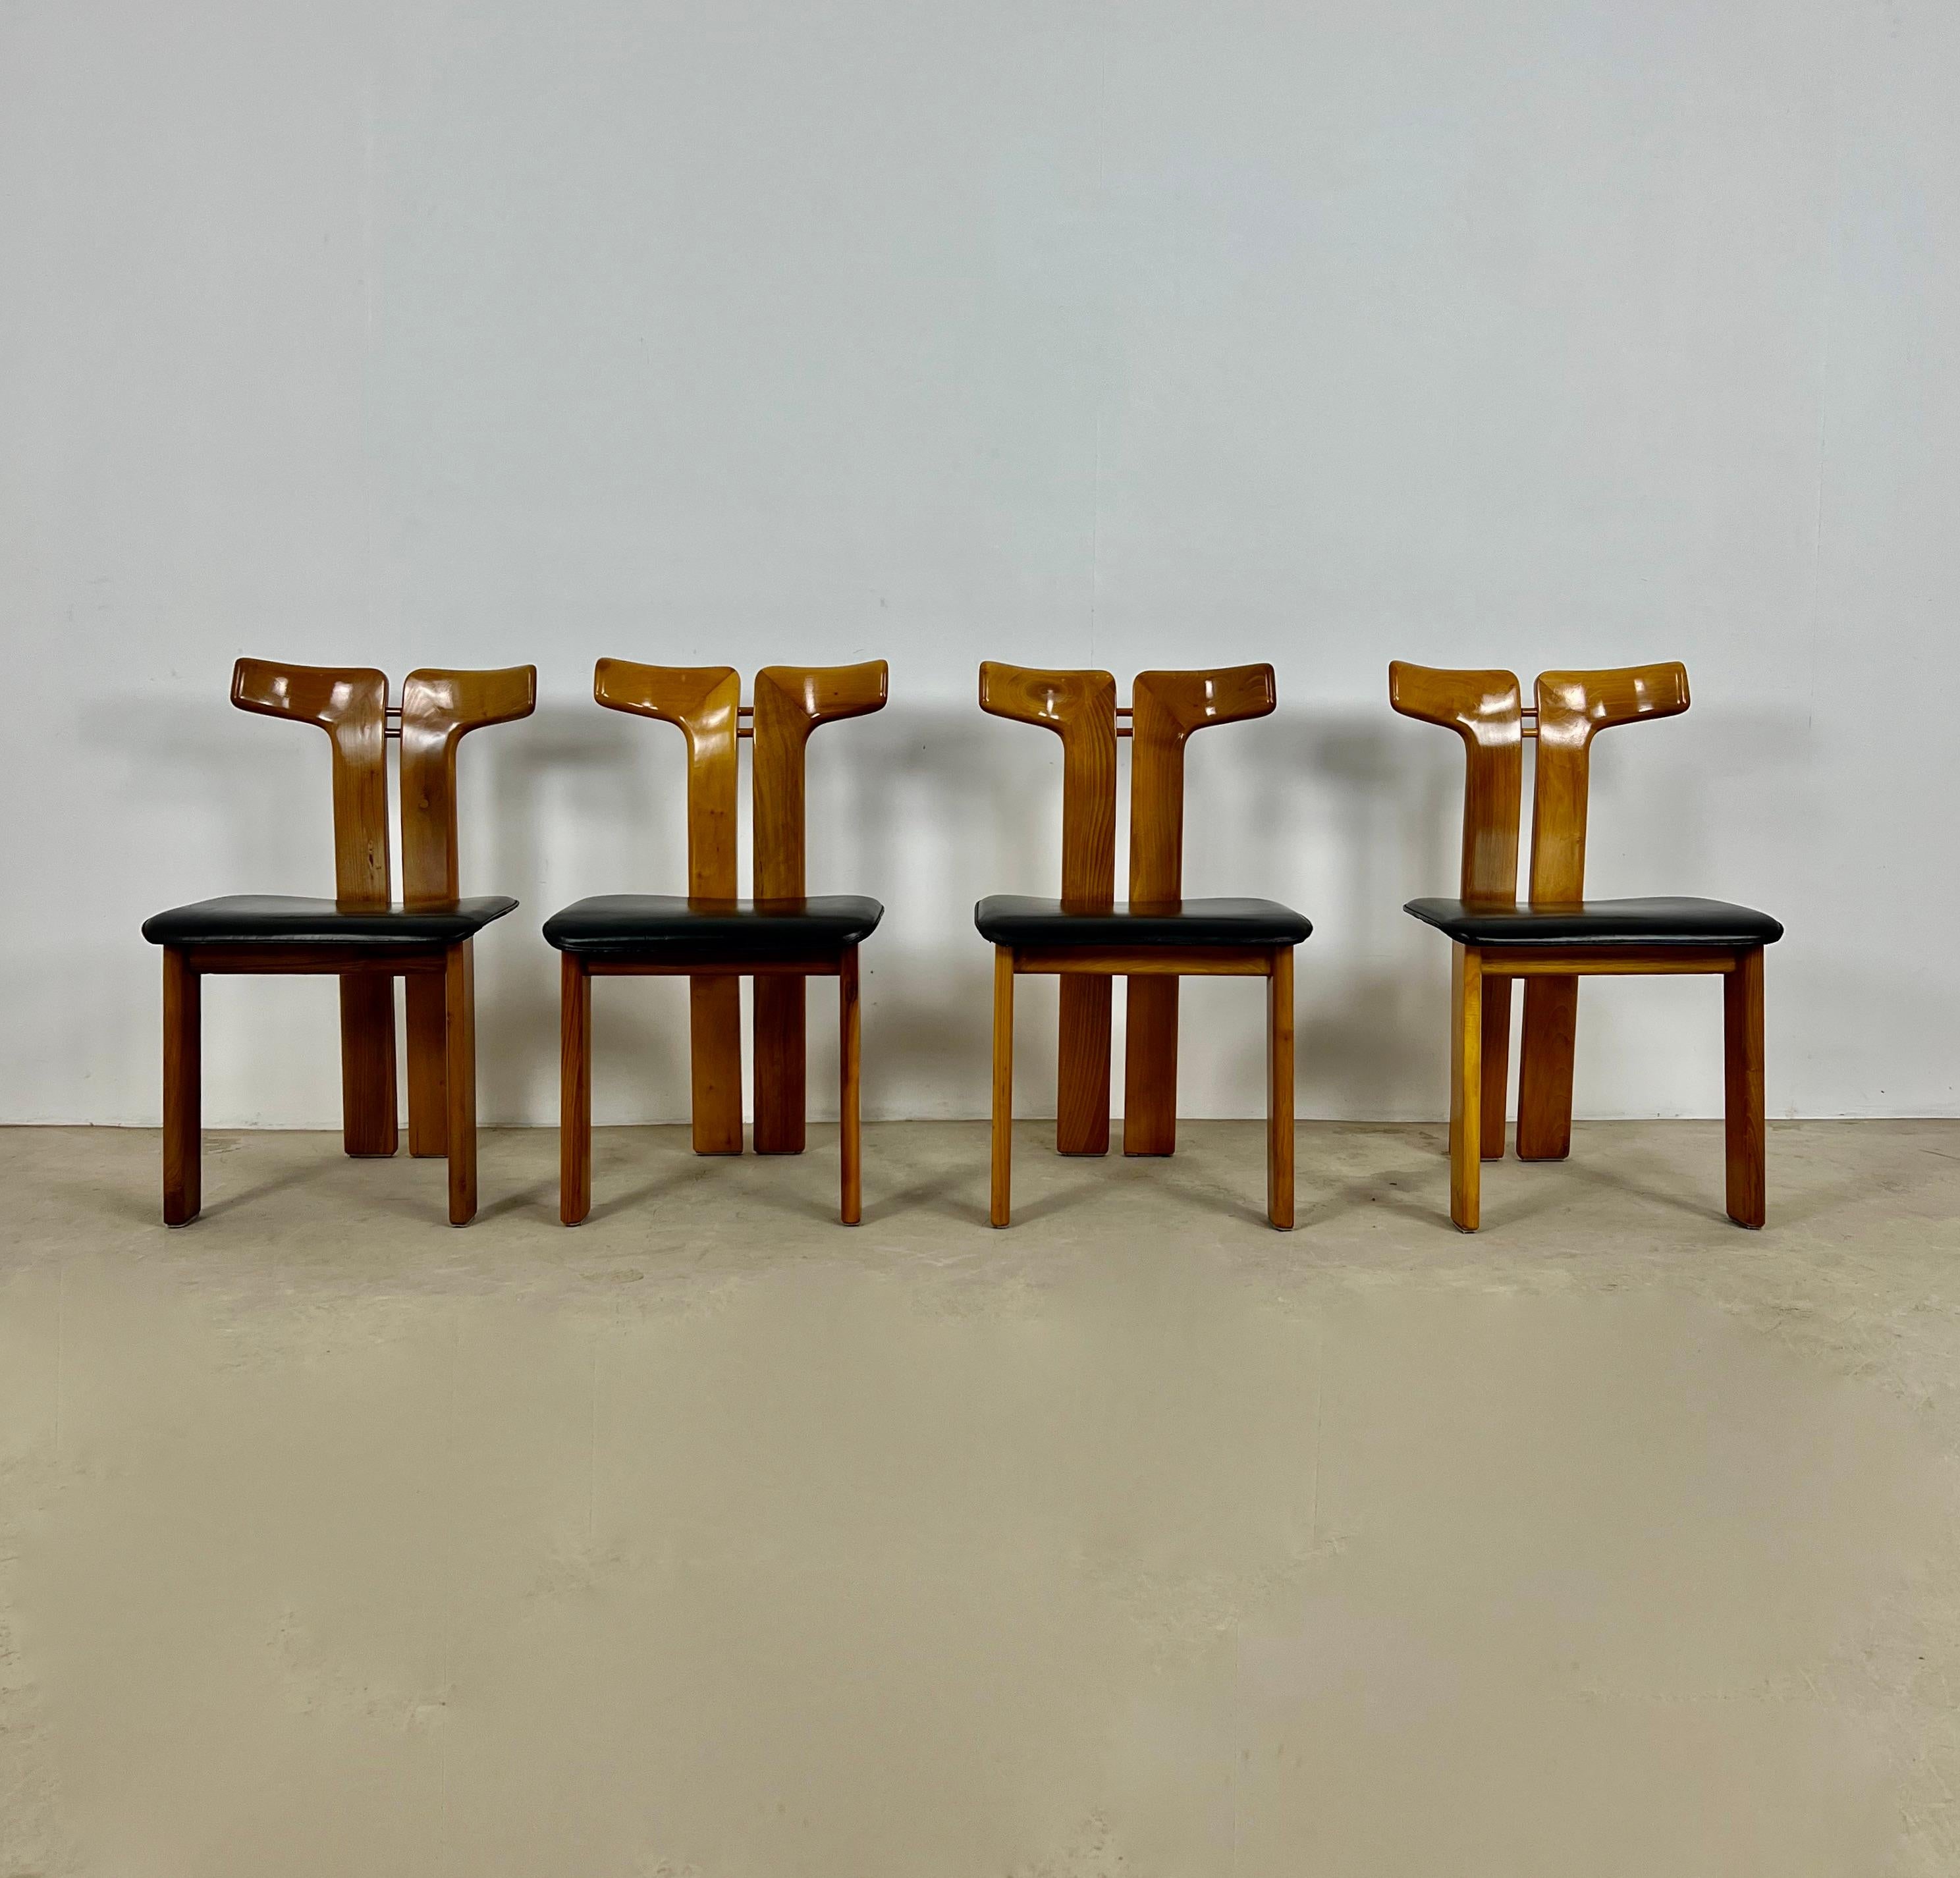 Set of 4 leather and wood chairs by Pierre Cardin Italy 1980s. Seat height: 44cm. Wear due to time and age of the chairs.